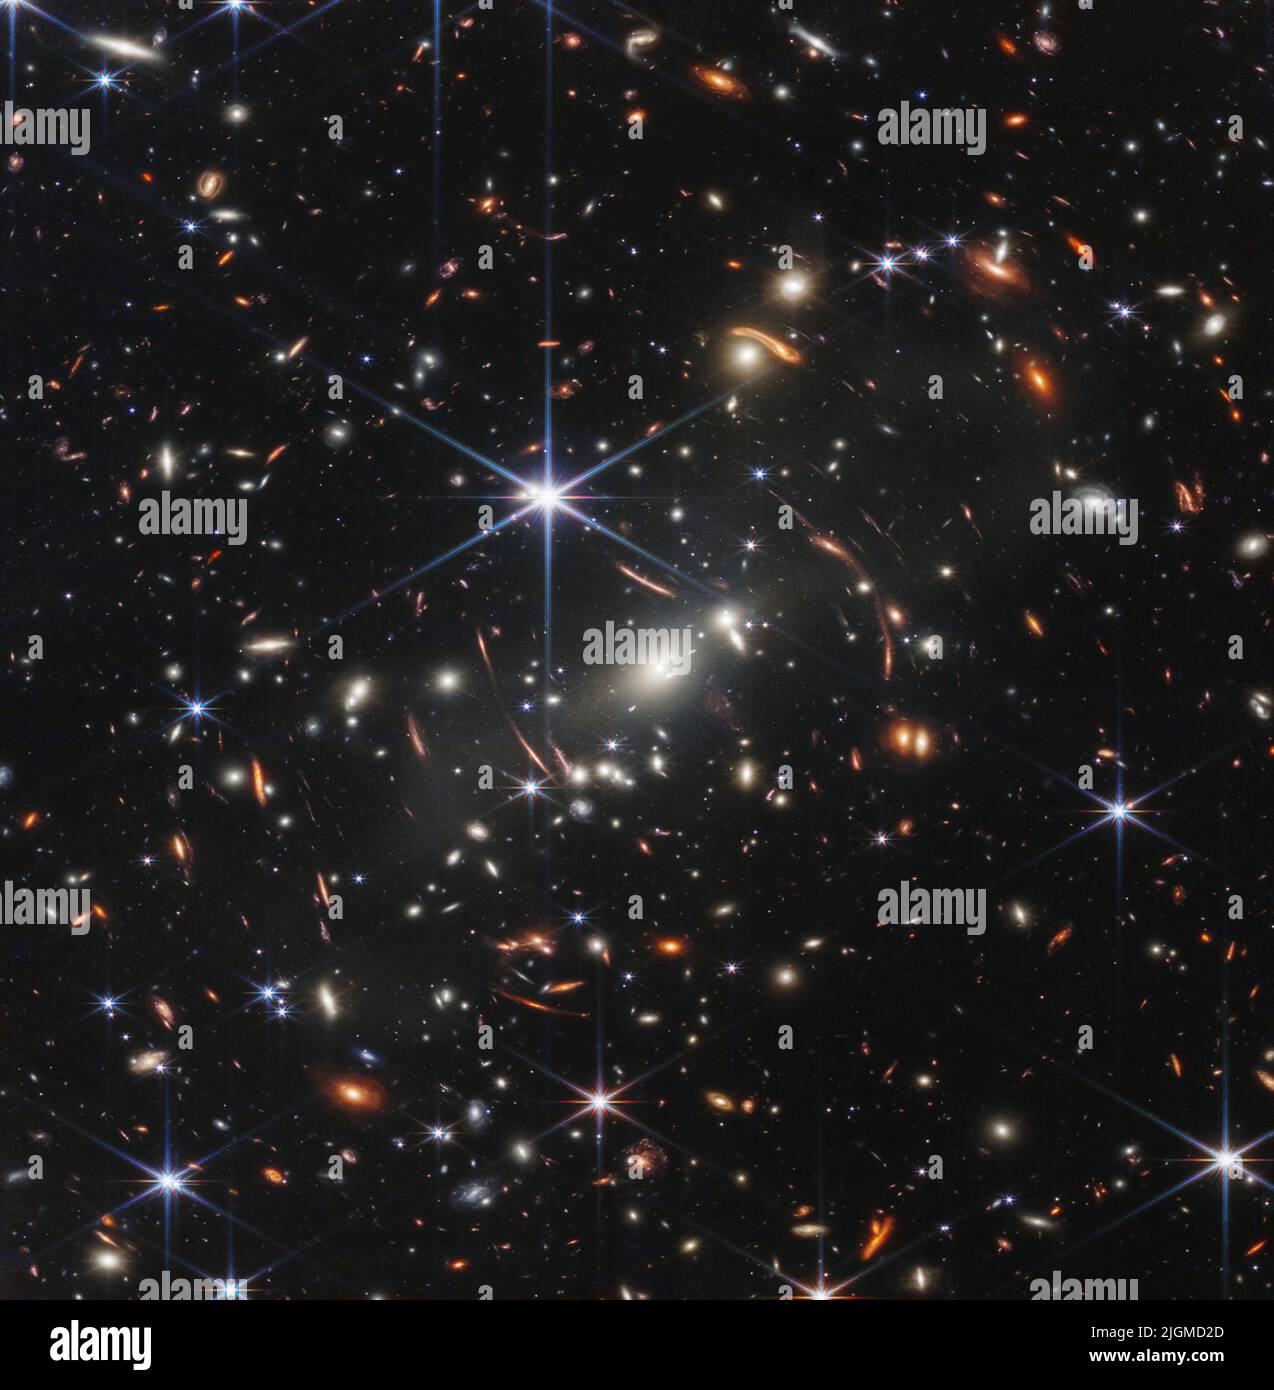 NASA's James Webb Space Telescope has produced the deepest and sharpest infrared image of the distant universe to date. Known as Webb's First Deep Field, this image of galaxy cluster SMACS 0723 was taken by Webb's Near-Infrared Camera (NIRCam), and is a composite made from images at different wavelengths, totaling 12.5 hours - achieving depths at infrared wavelengths beyond the Hubble Space Telescope's deepest fields, which took weeks. The image shows the galaxy cluster SMACS 0723 as it appeared 4.6 billion years ago. NASA/UPI Stock Photo